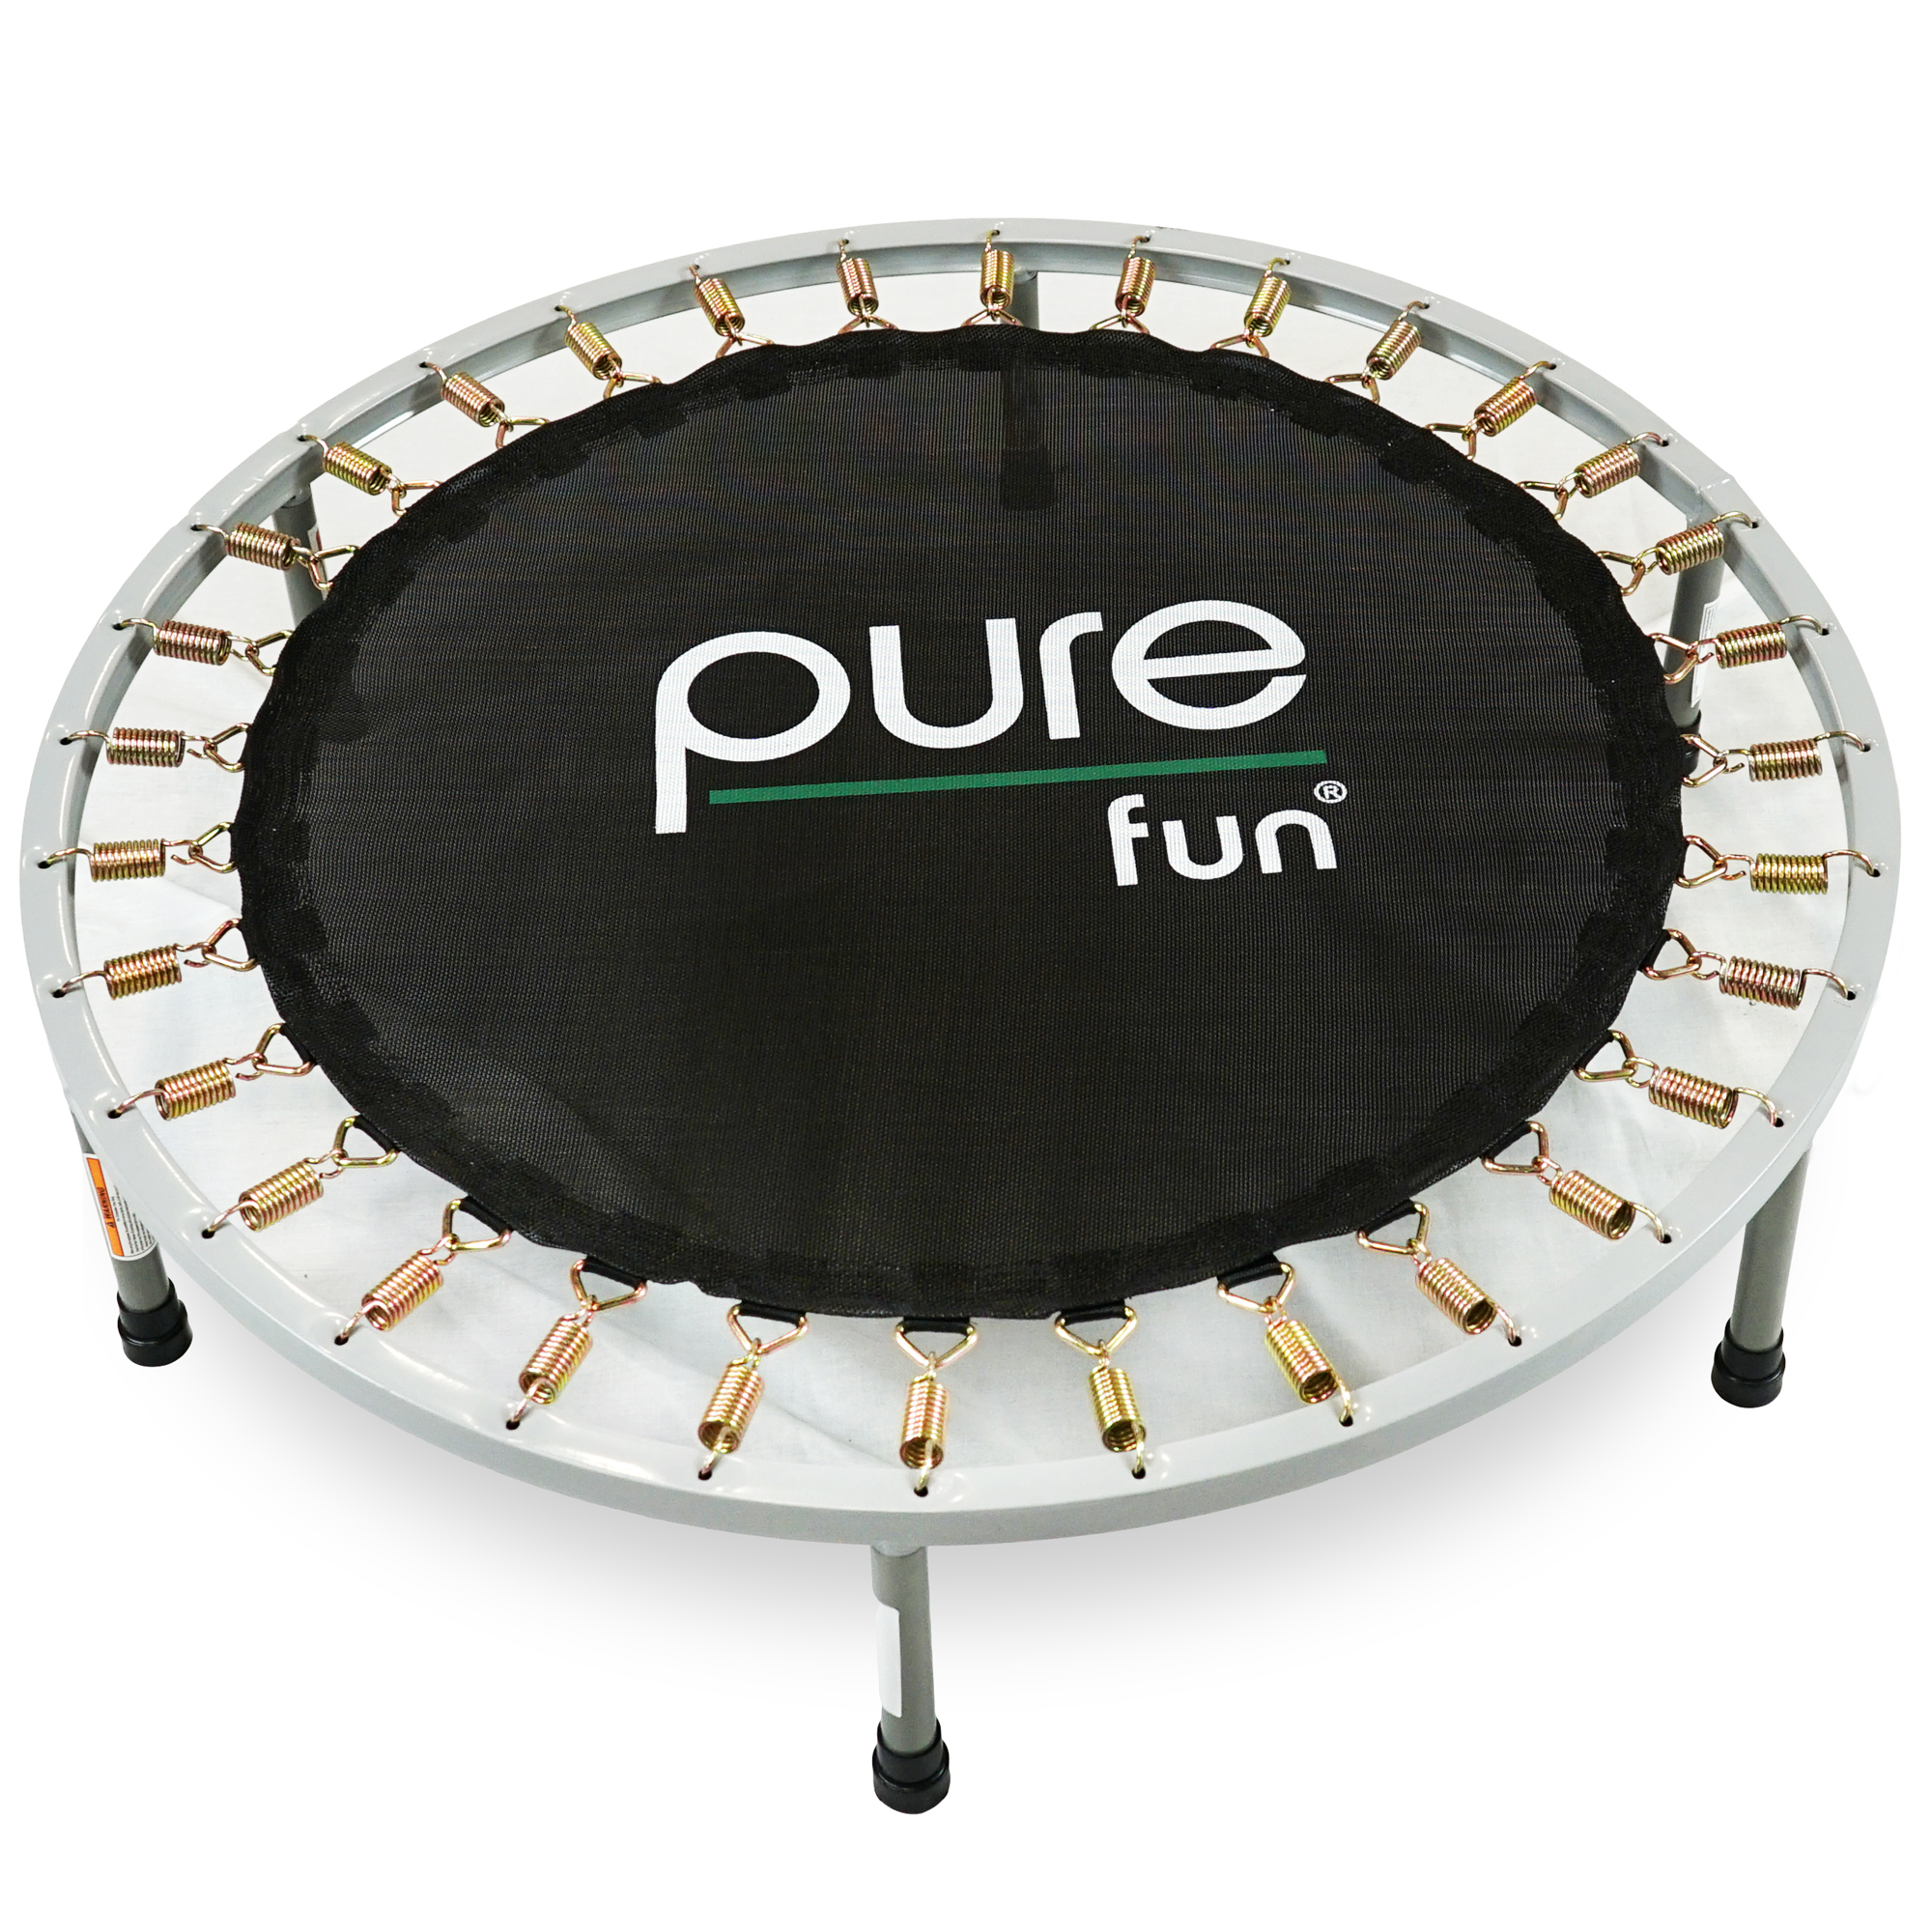 Pure Fun 38-Inch Mini Exercise Trampoline, Rebounder, 250lb Weight Limit - image 4 of 7